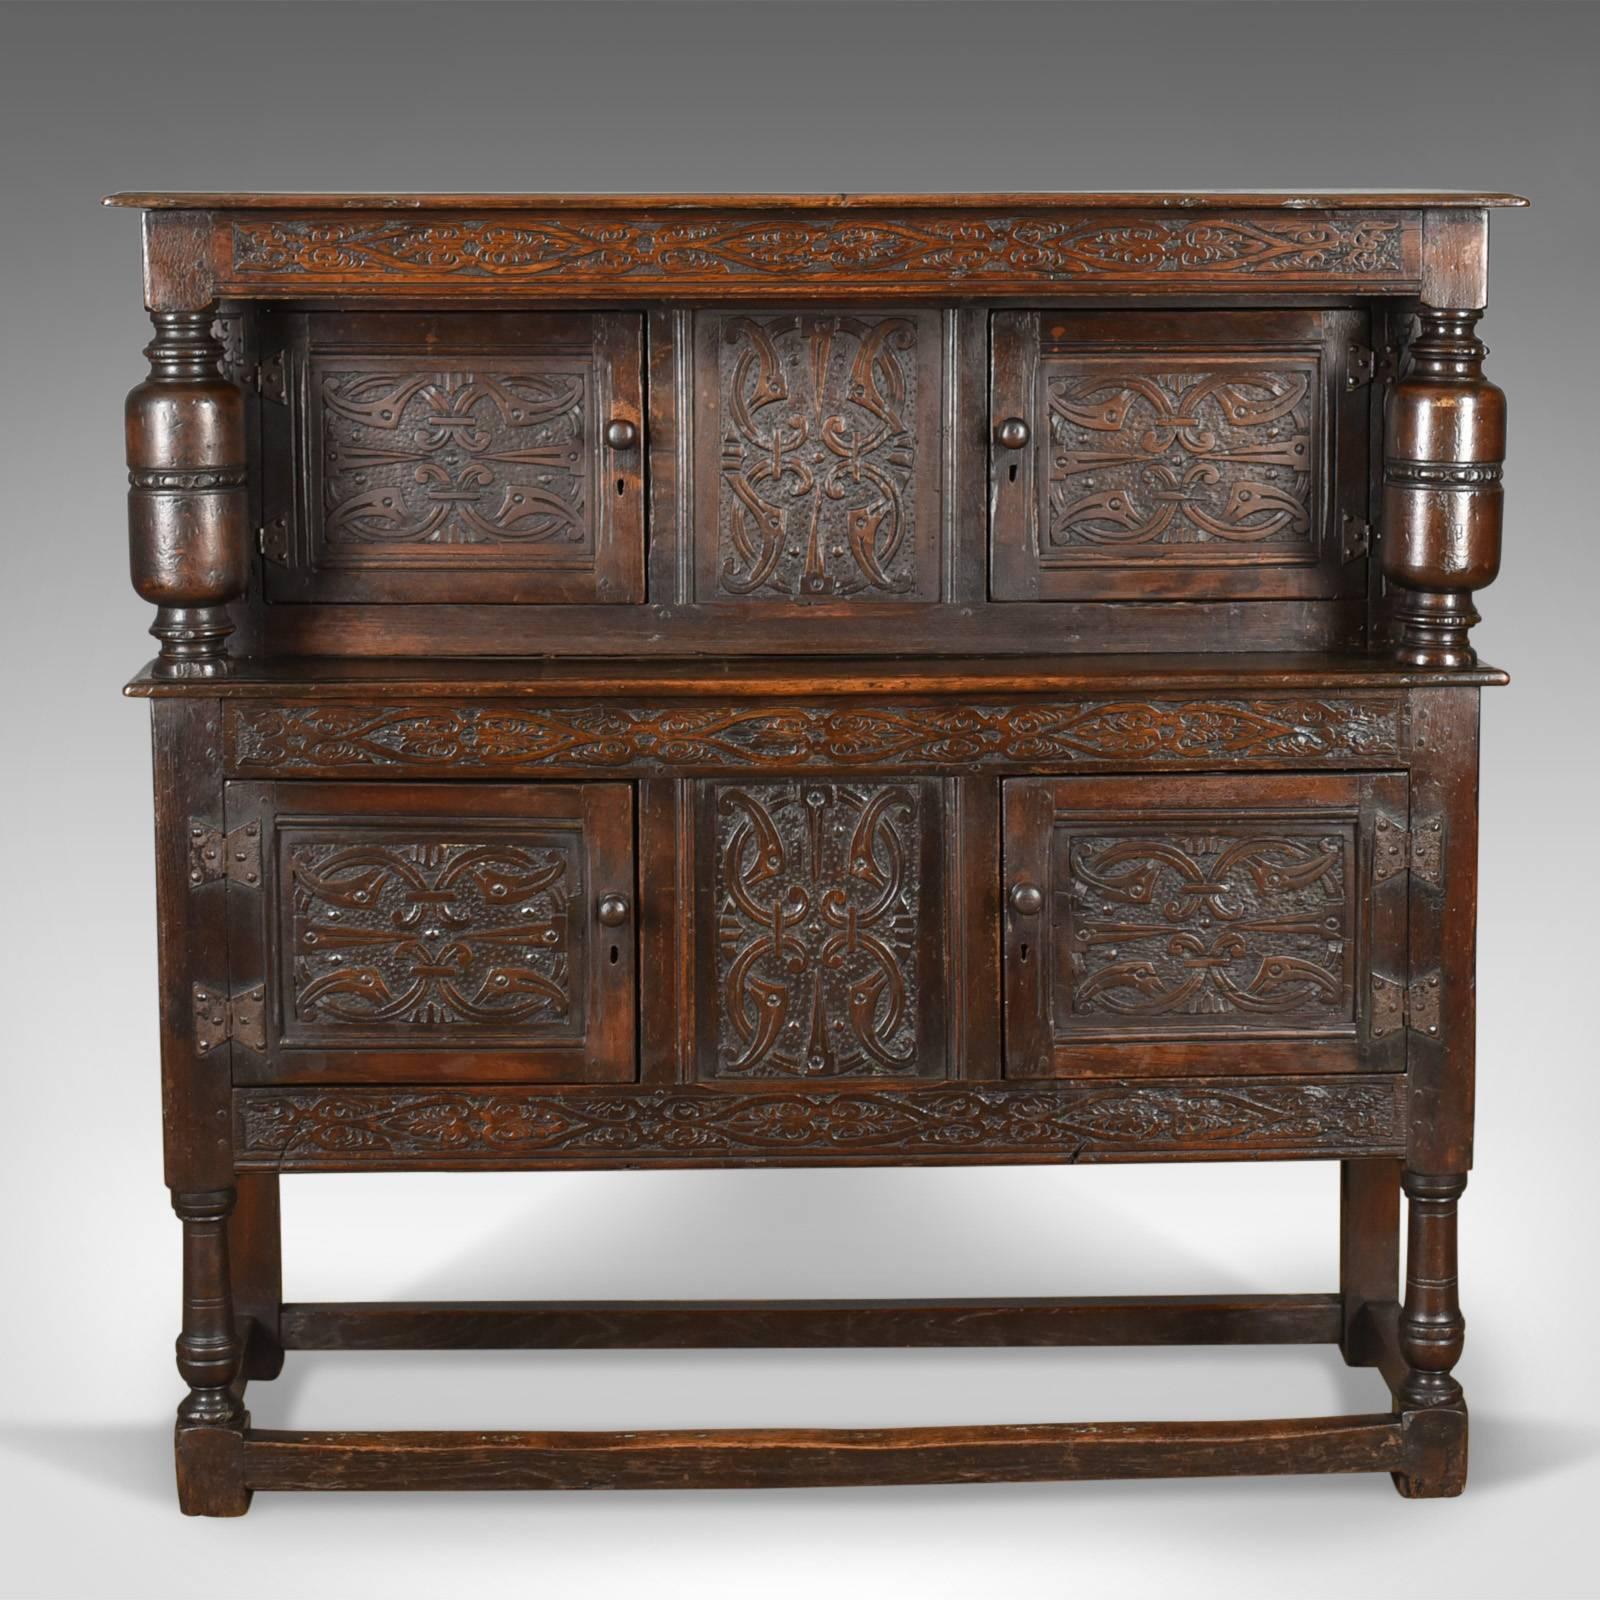 This is an antique court cupboard, a late Georgian, English oak sideboard in the Jacobean taste dating to circa 1800.

Deep, rich tones to the English oak
Desirable aged patina in a wax polished finish
Mid-sized and profusely decorated with